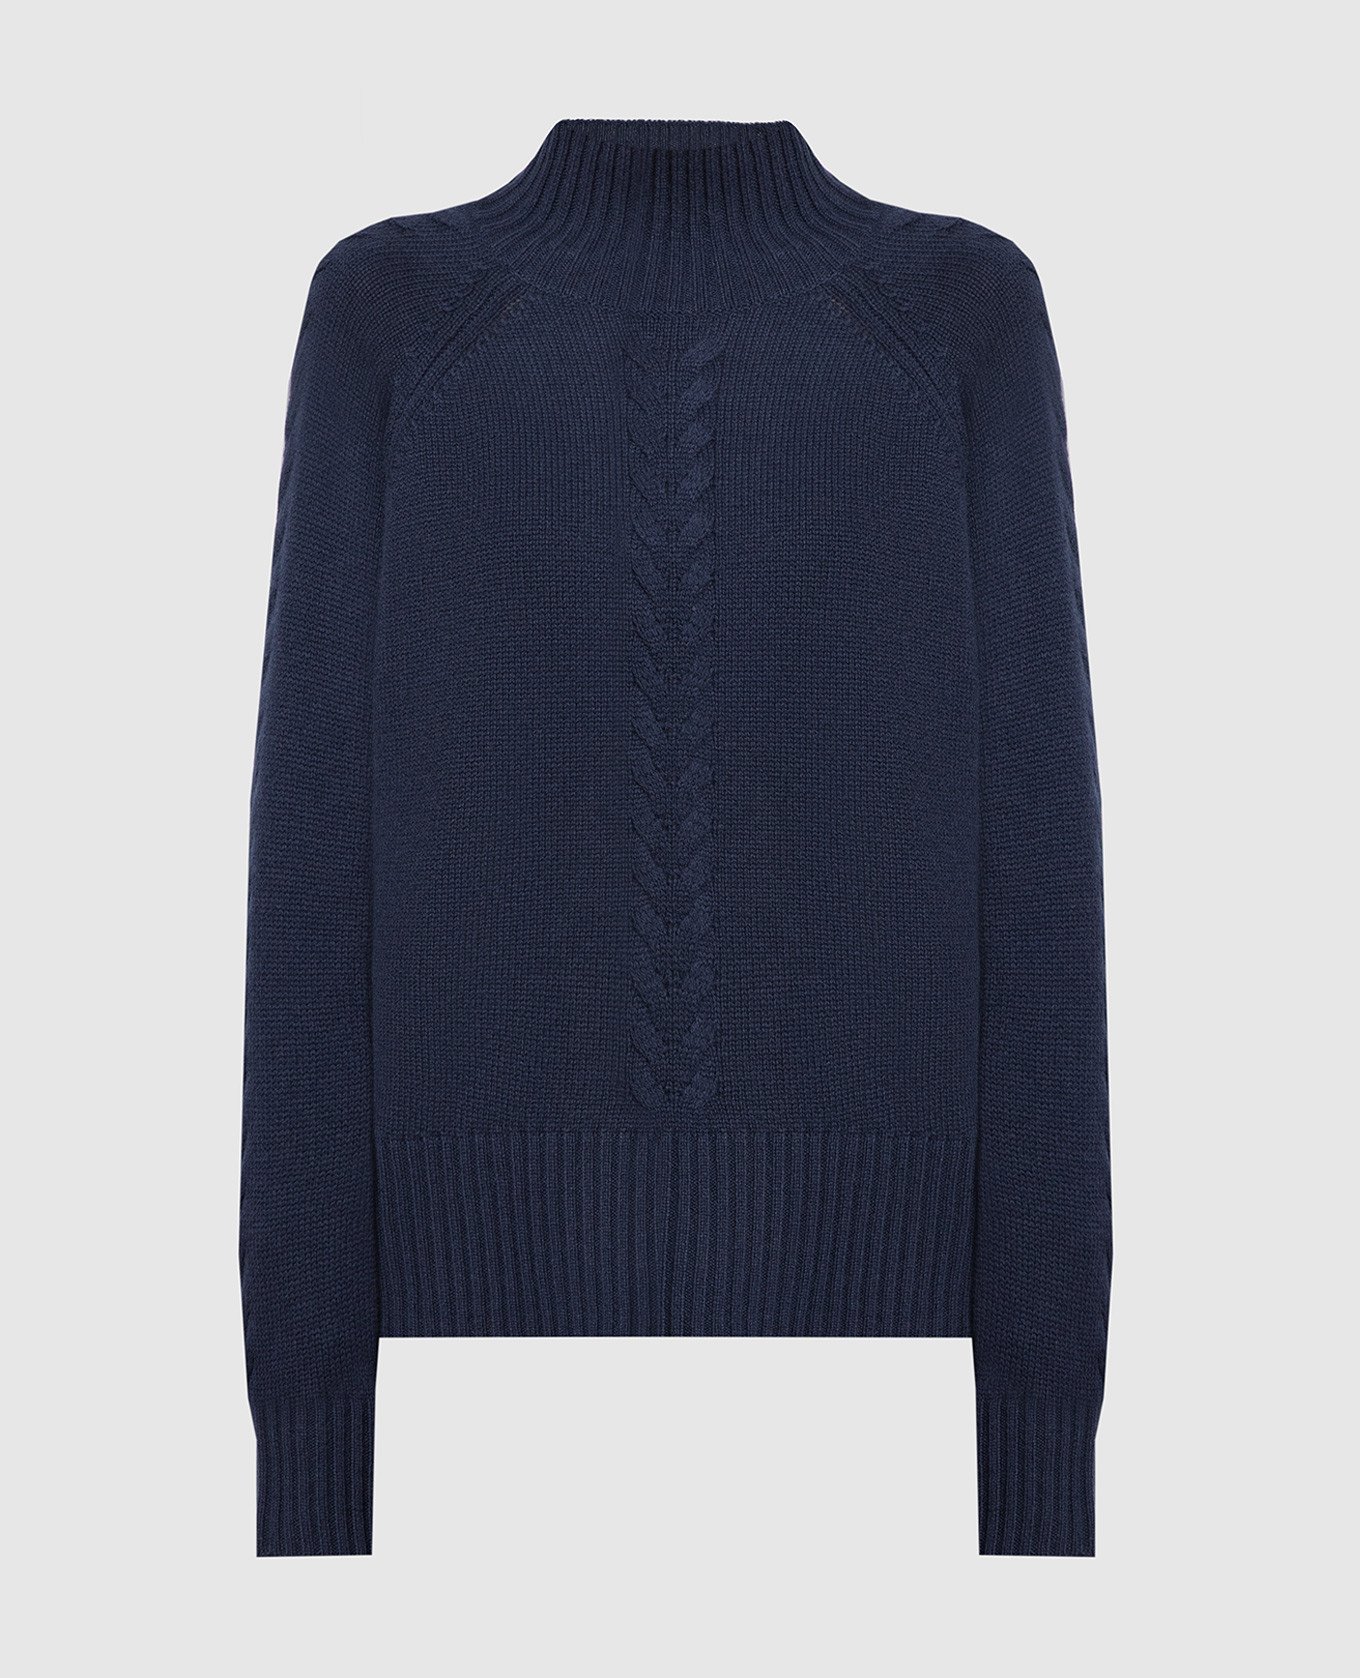 Blue wool and cashmere sweater with a textured pattern